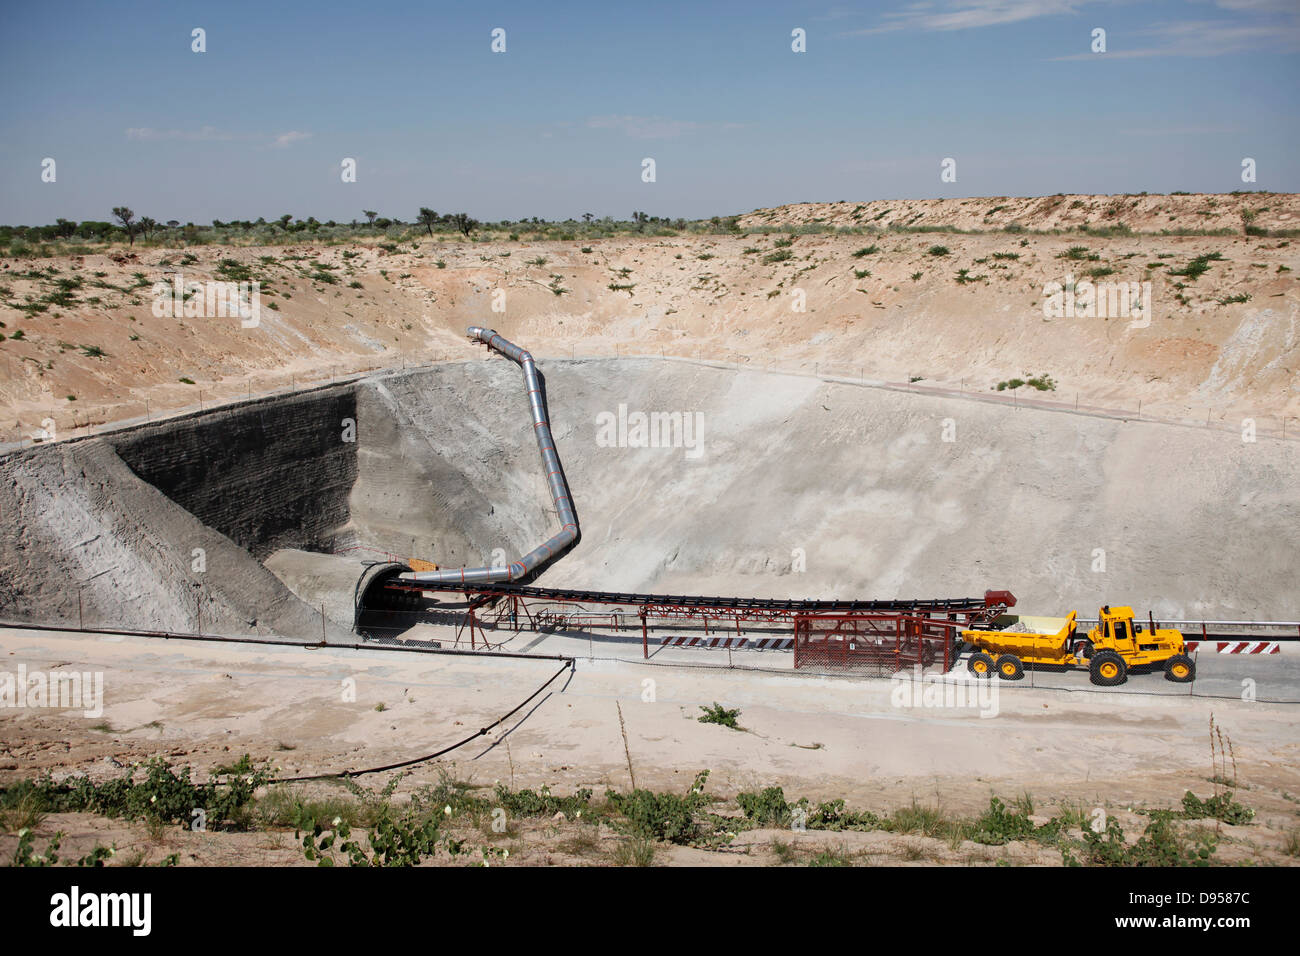 An inclined entrance to a mine shaft of a diamond mine in the desert is nearing completion. The mine will deliver precious stones of highest quality . Stock Photo